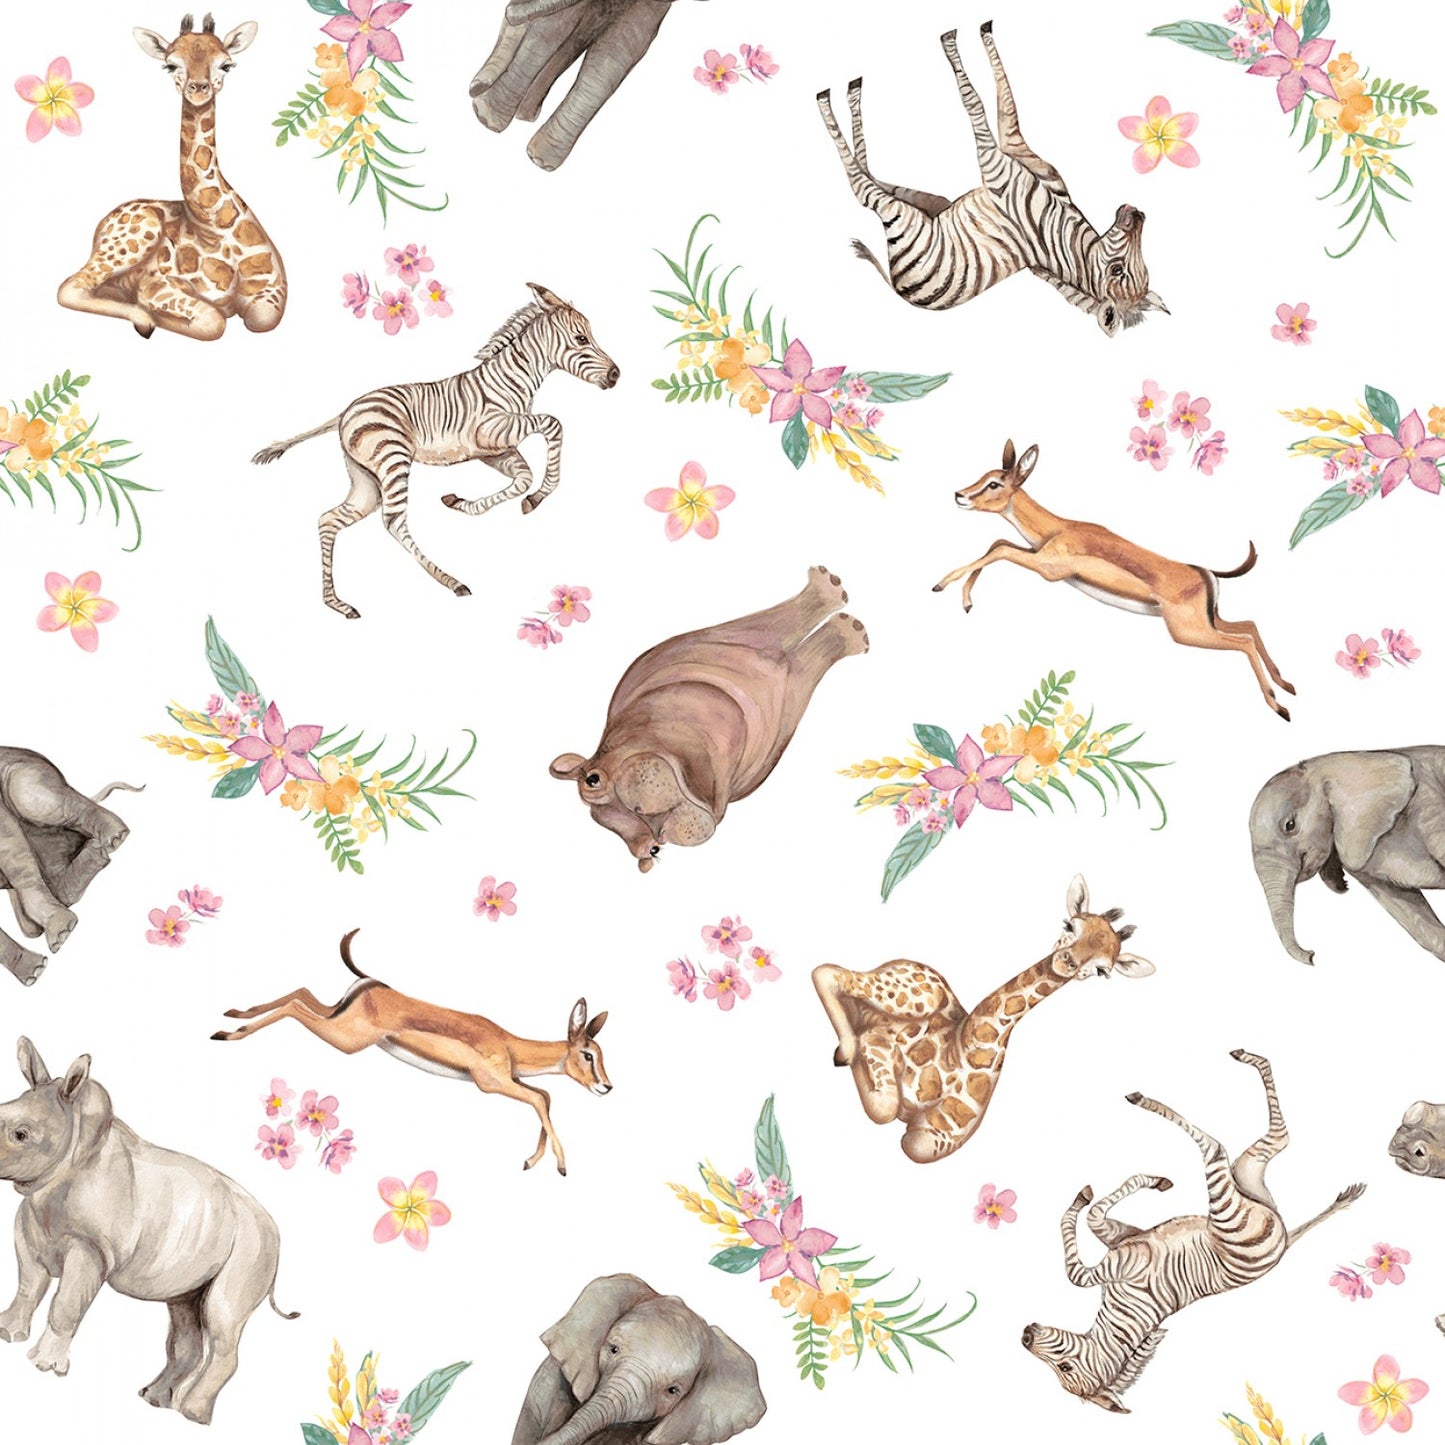 All Things Big Start Small Tossed Herbivores Fabric - By the yard